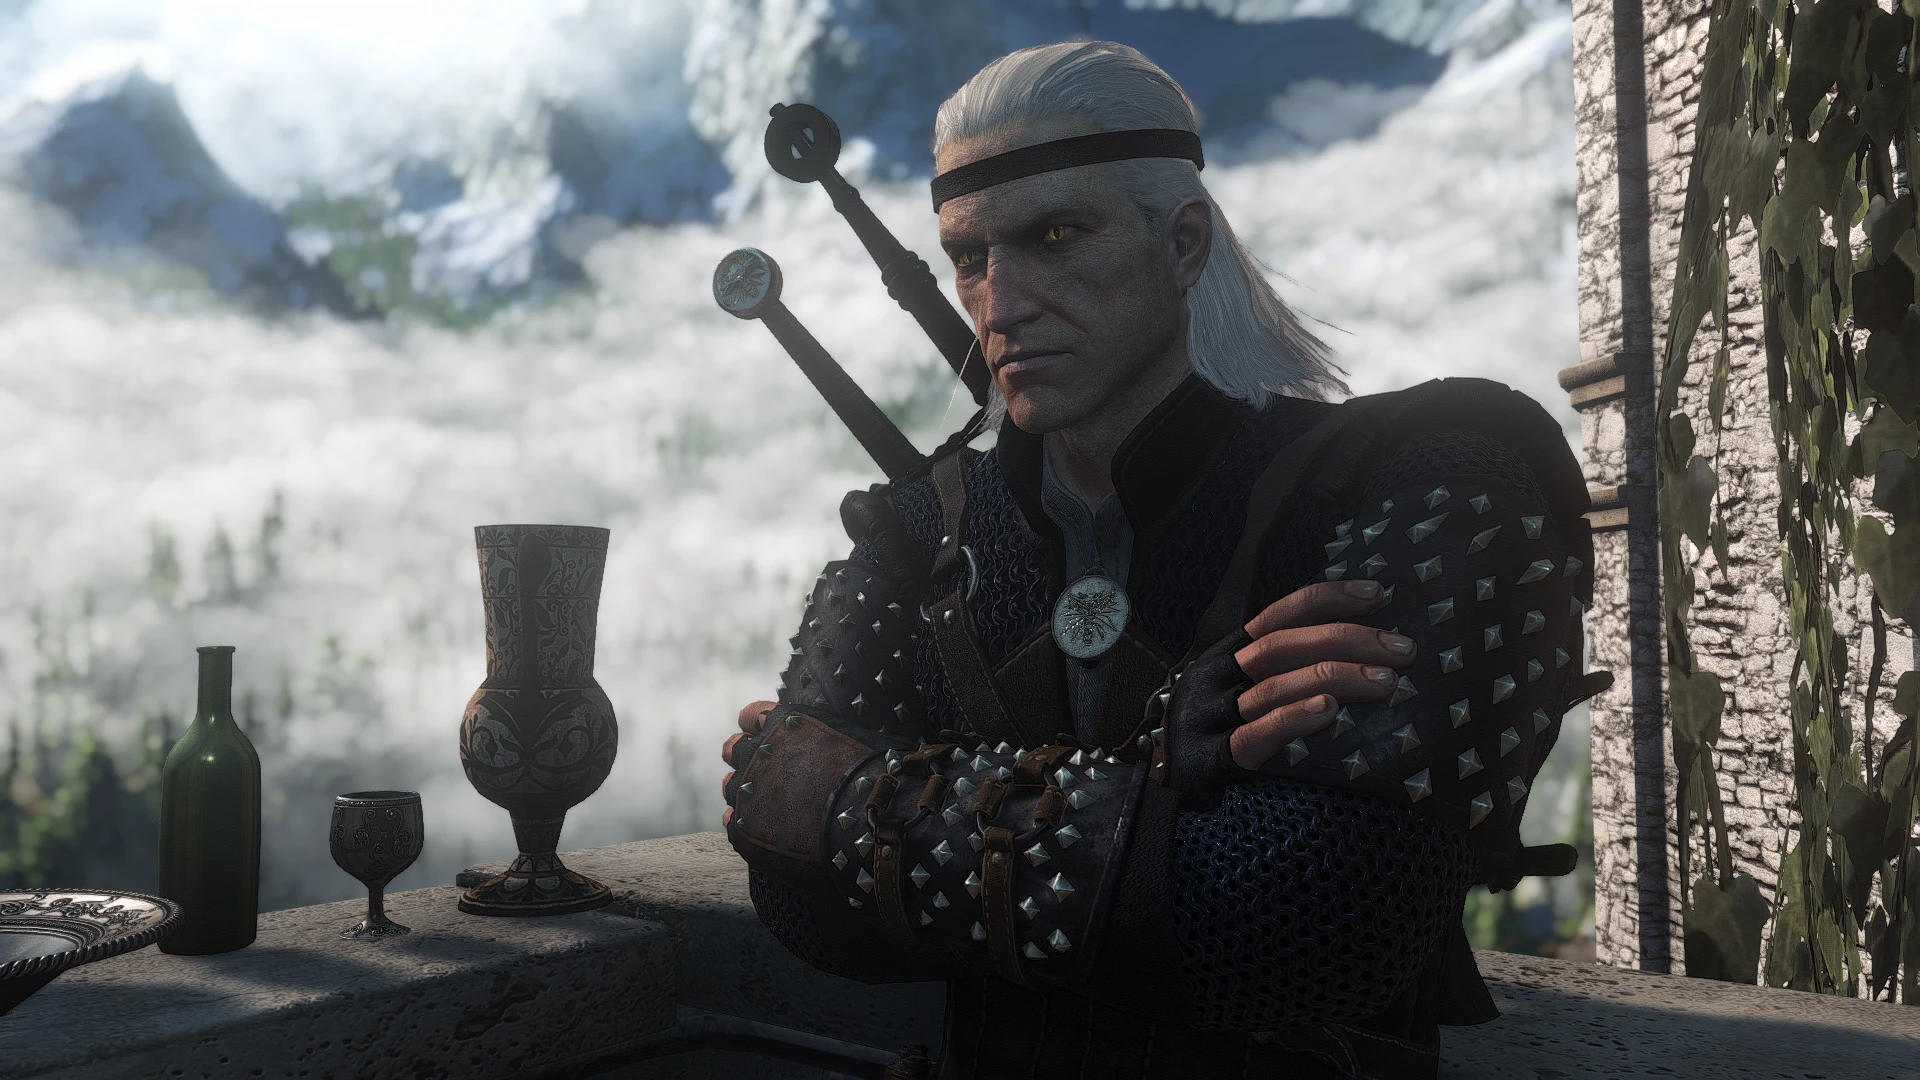 Most Book Friendly Geralt by now at The Witcher 3 Nexus ...